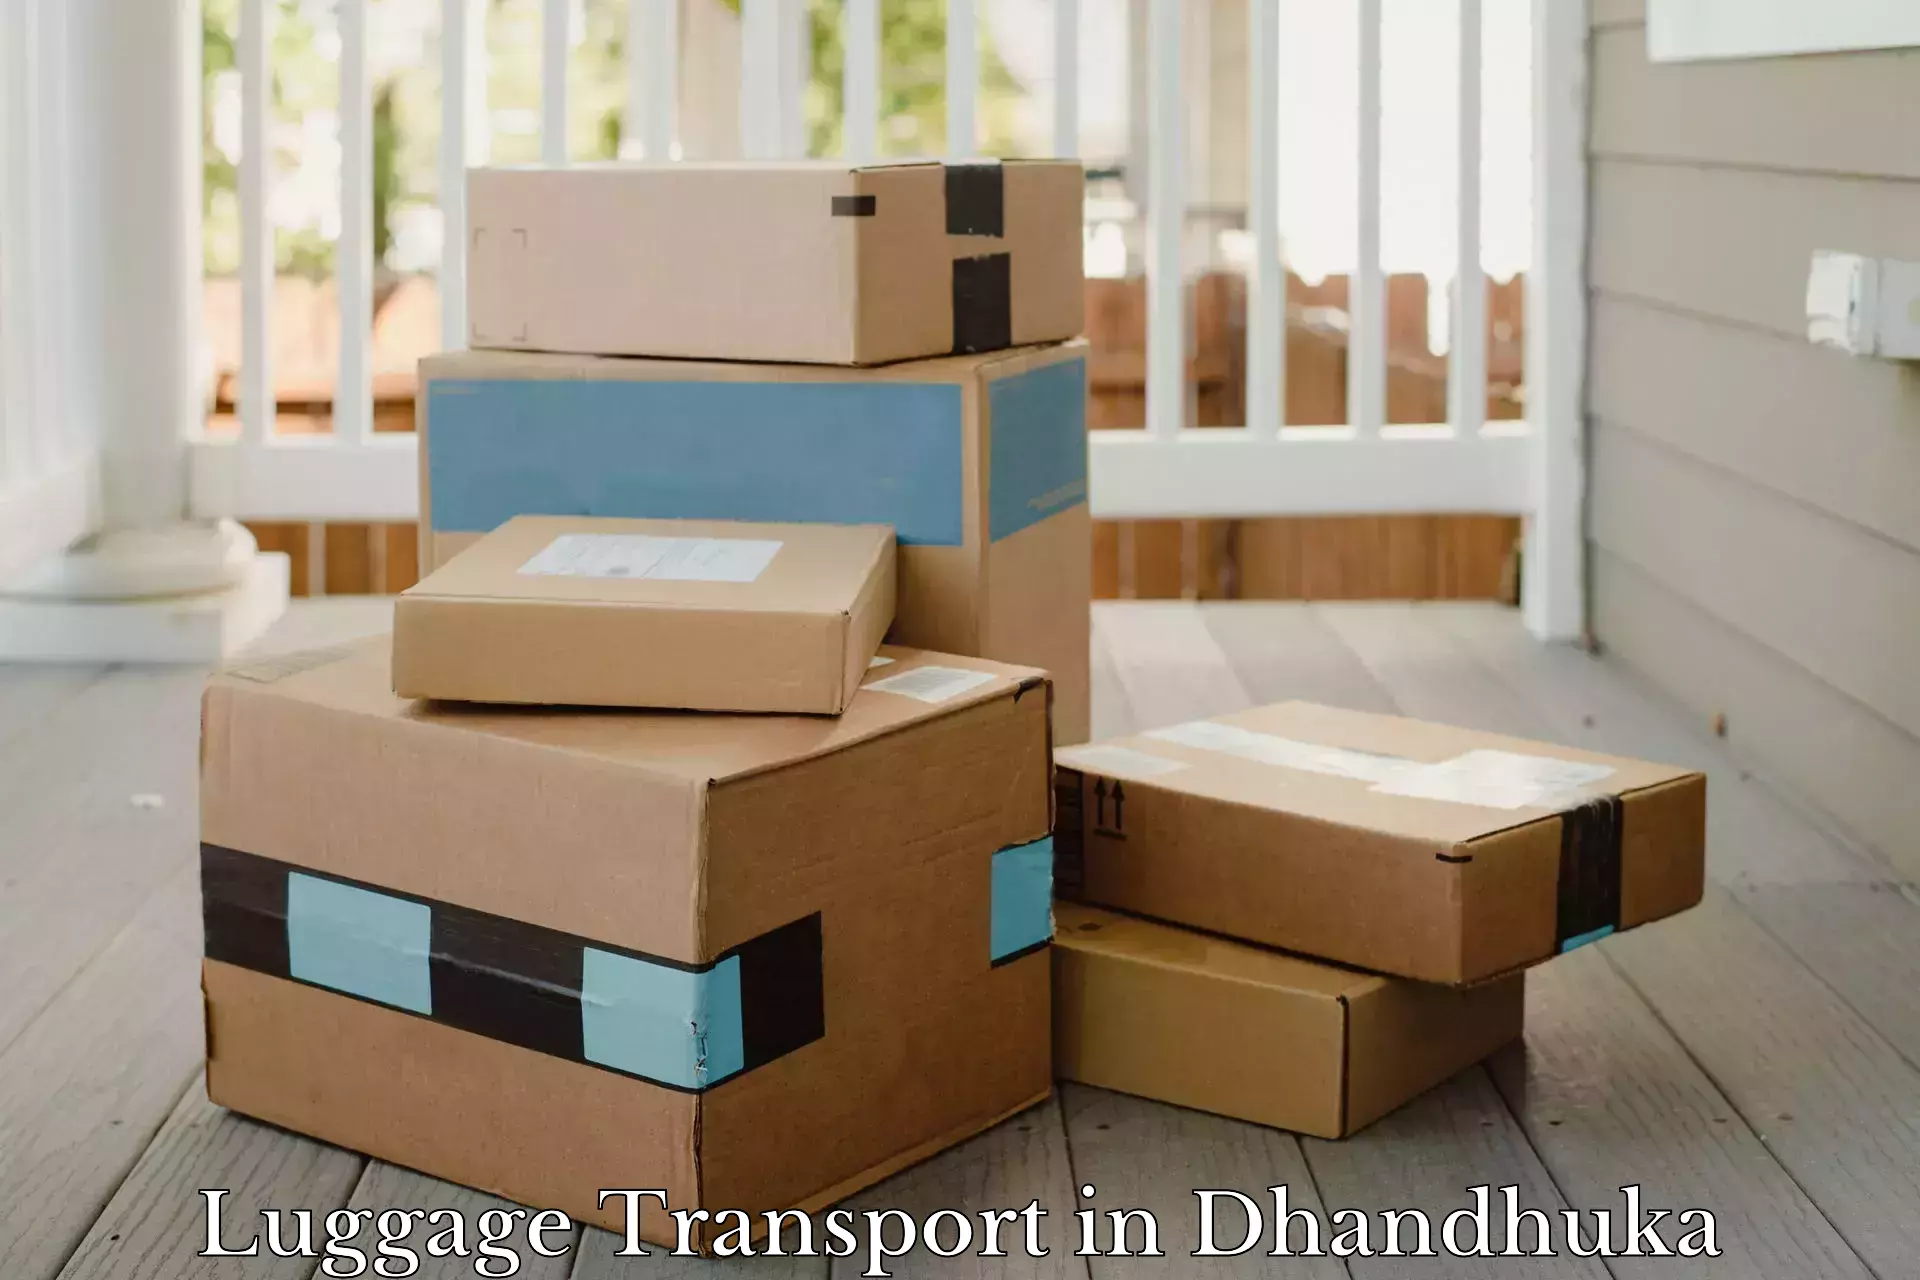 Heavy luggage shipping in Dhandhuka